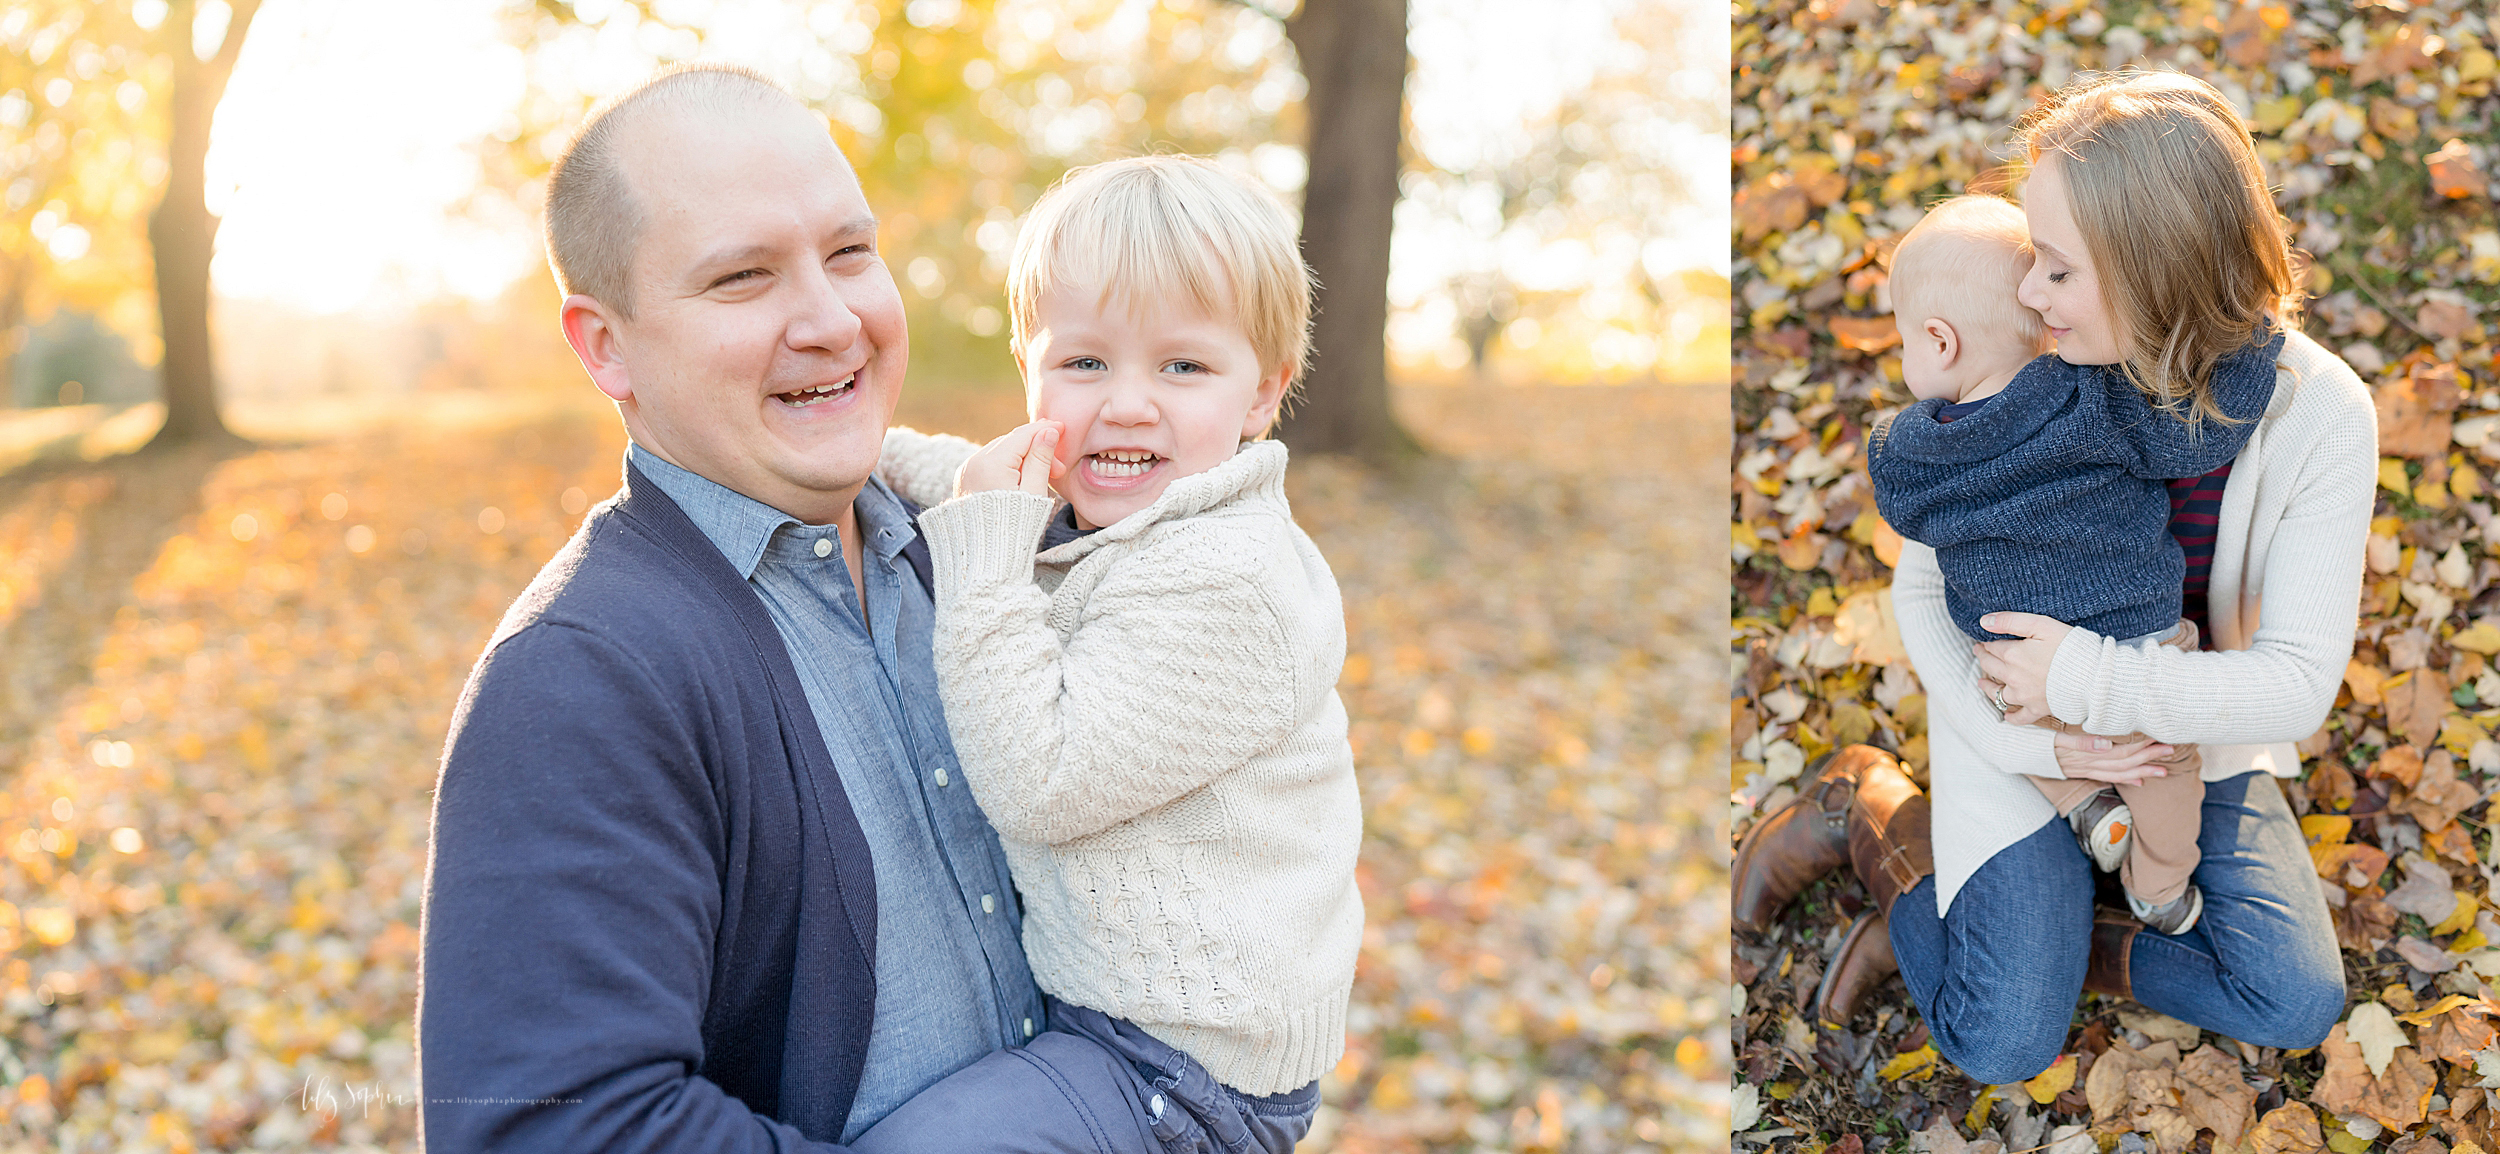 atlanta-midtown-brookhaven-decatur-lily-sophia-photography-photographer-portraits-grant-park-family-sunset-fall-outdoor-session-brothers-toddler-baby_0149.jpg